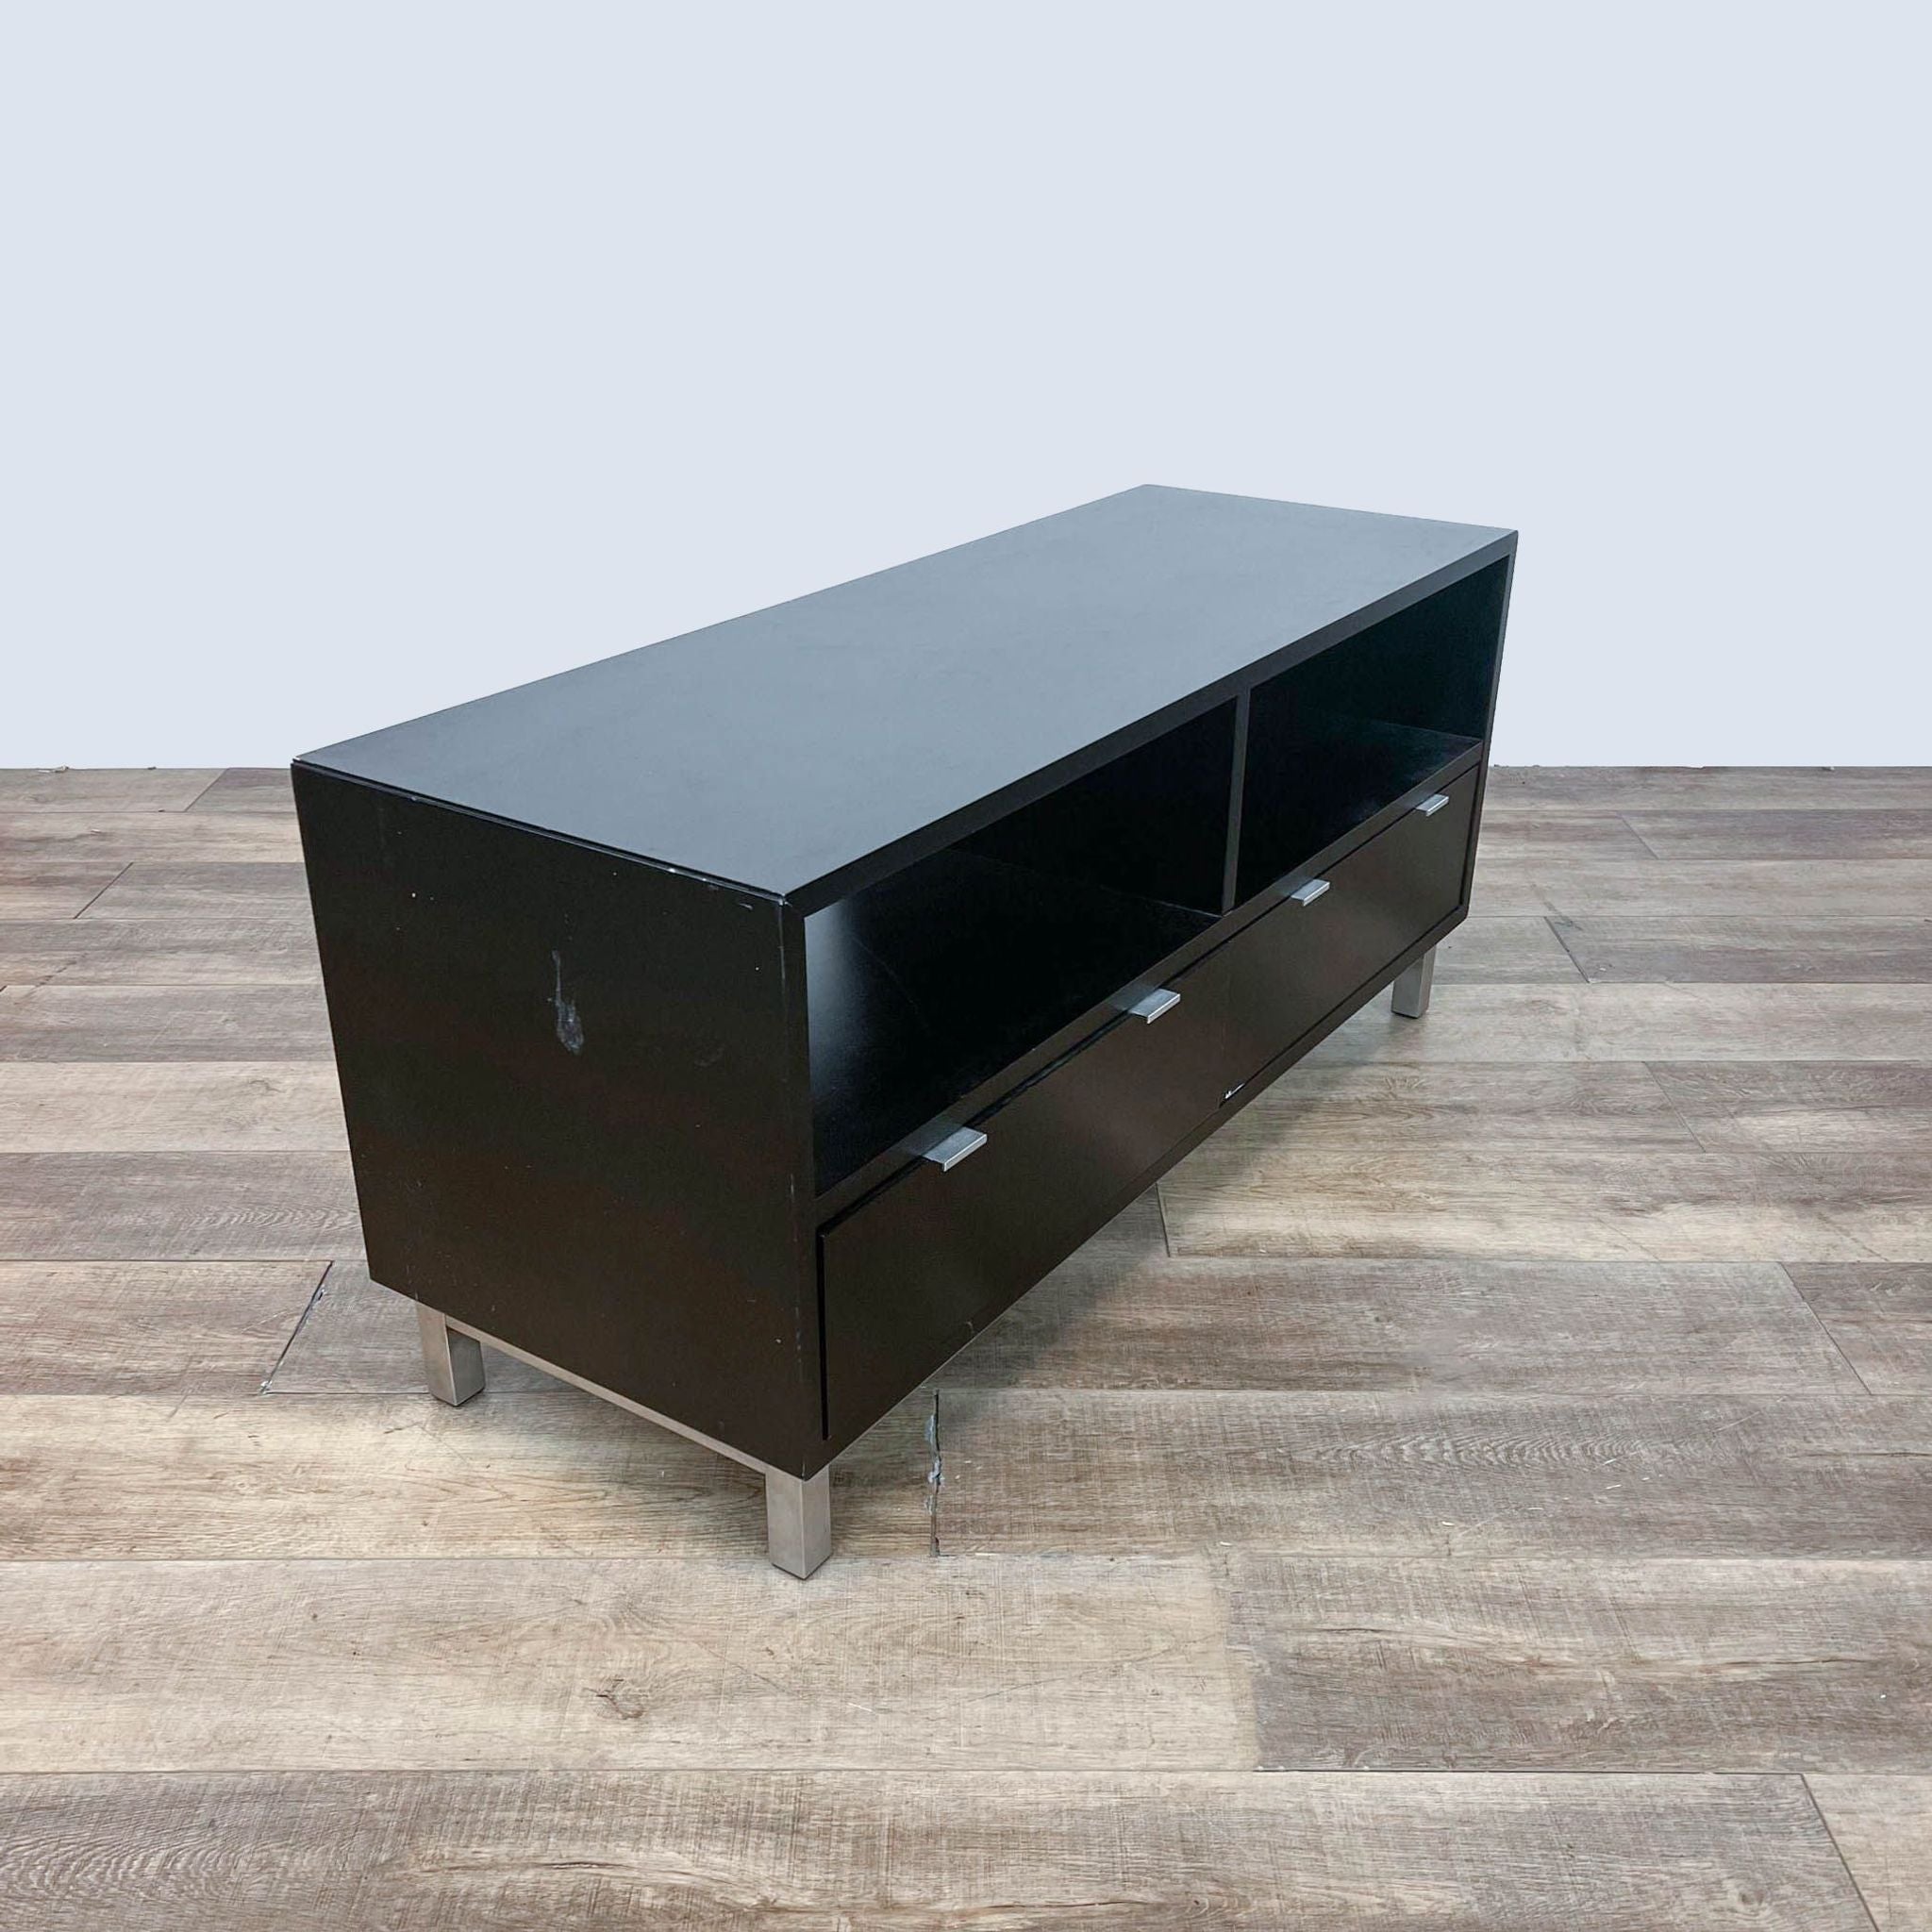 Modern Reperch entertainment unit with metallic base, including storage compartments and visible chrome handles.